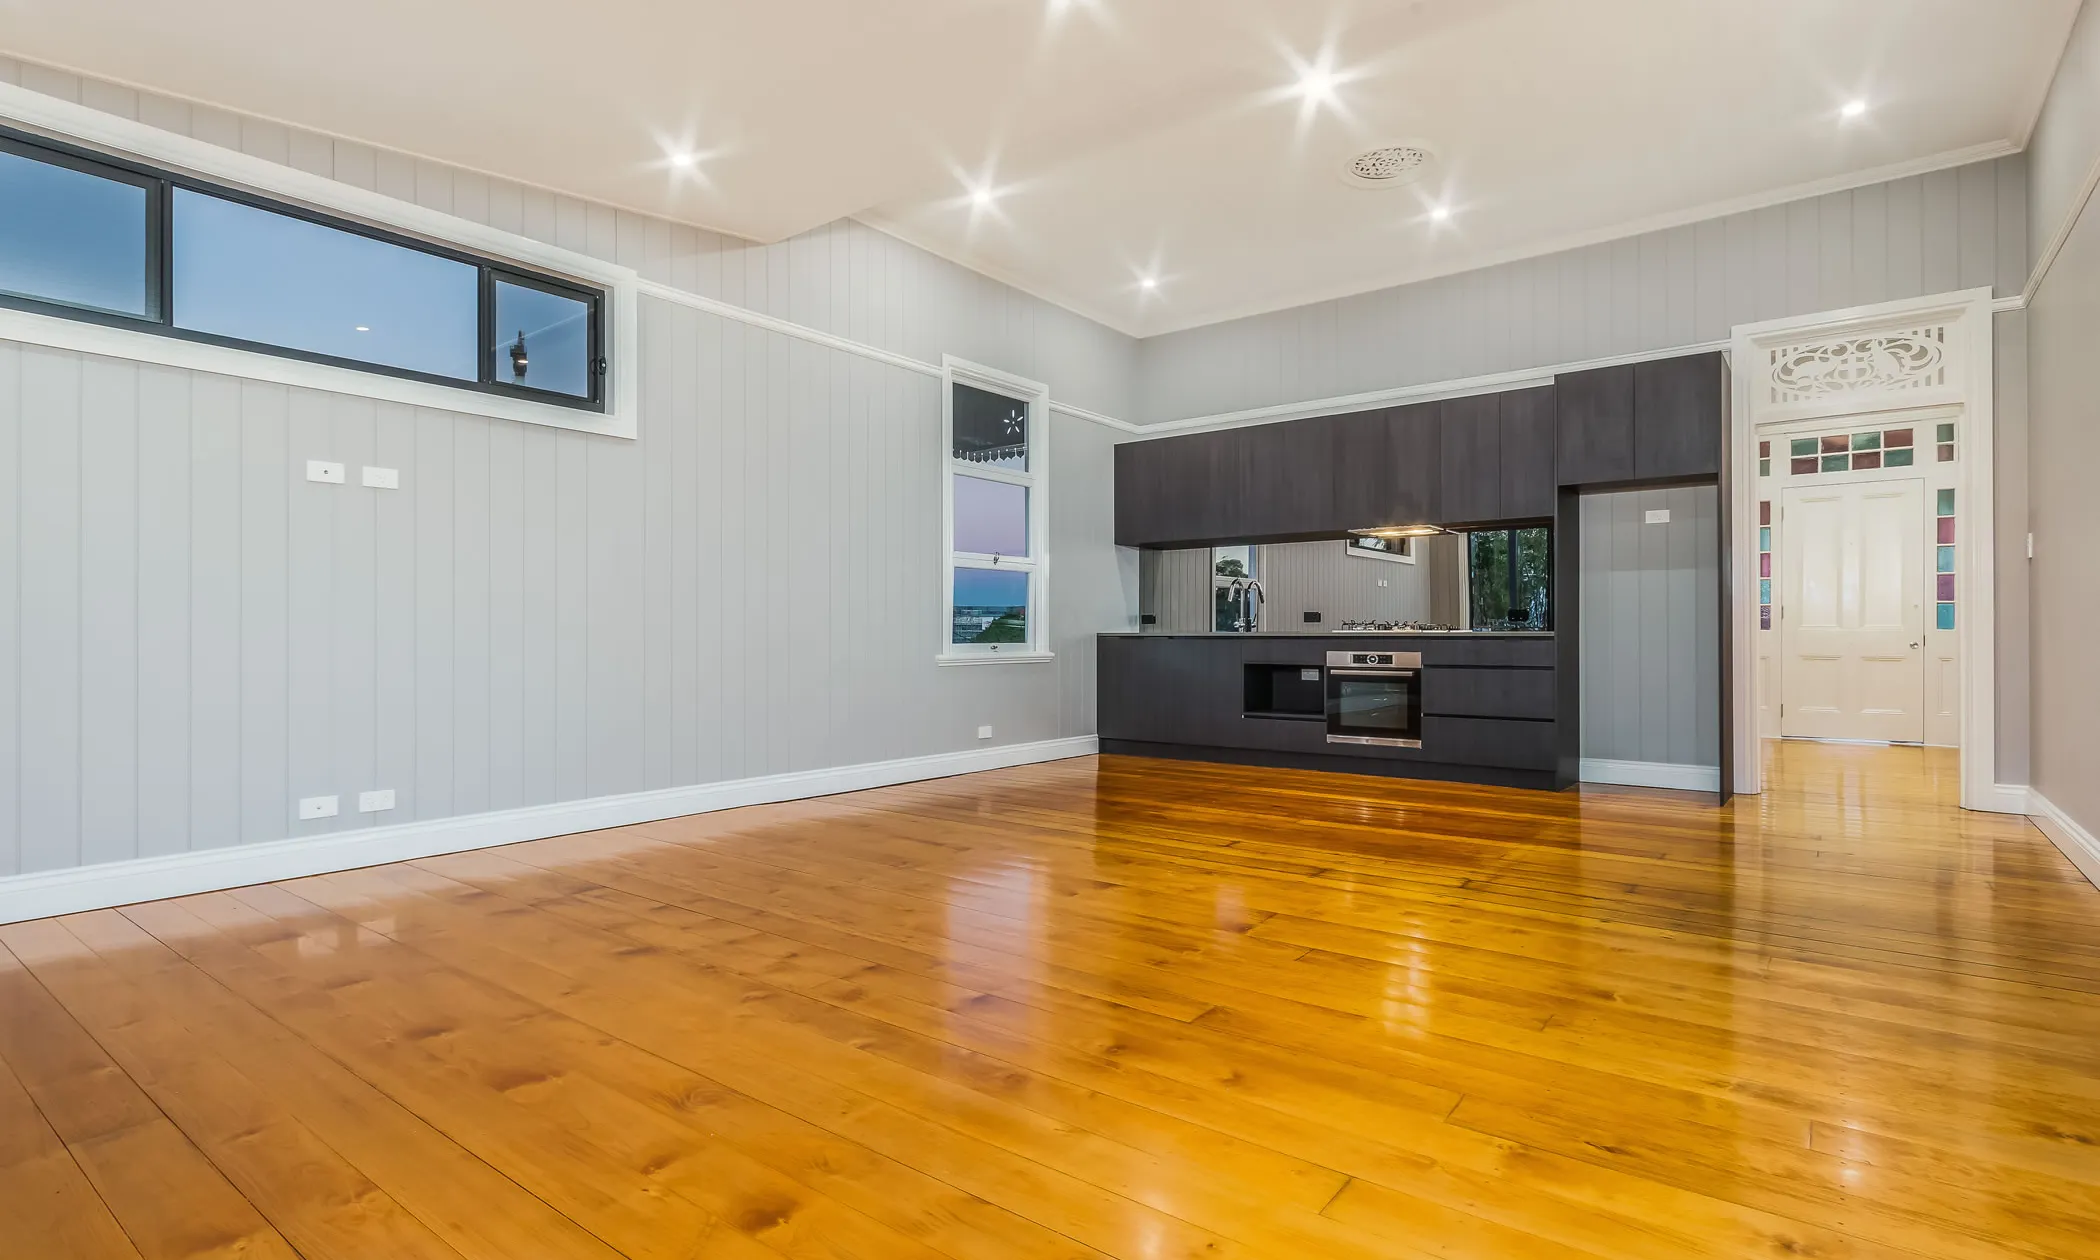 Kitchen and front entry to traditional Queenslander renovation